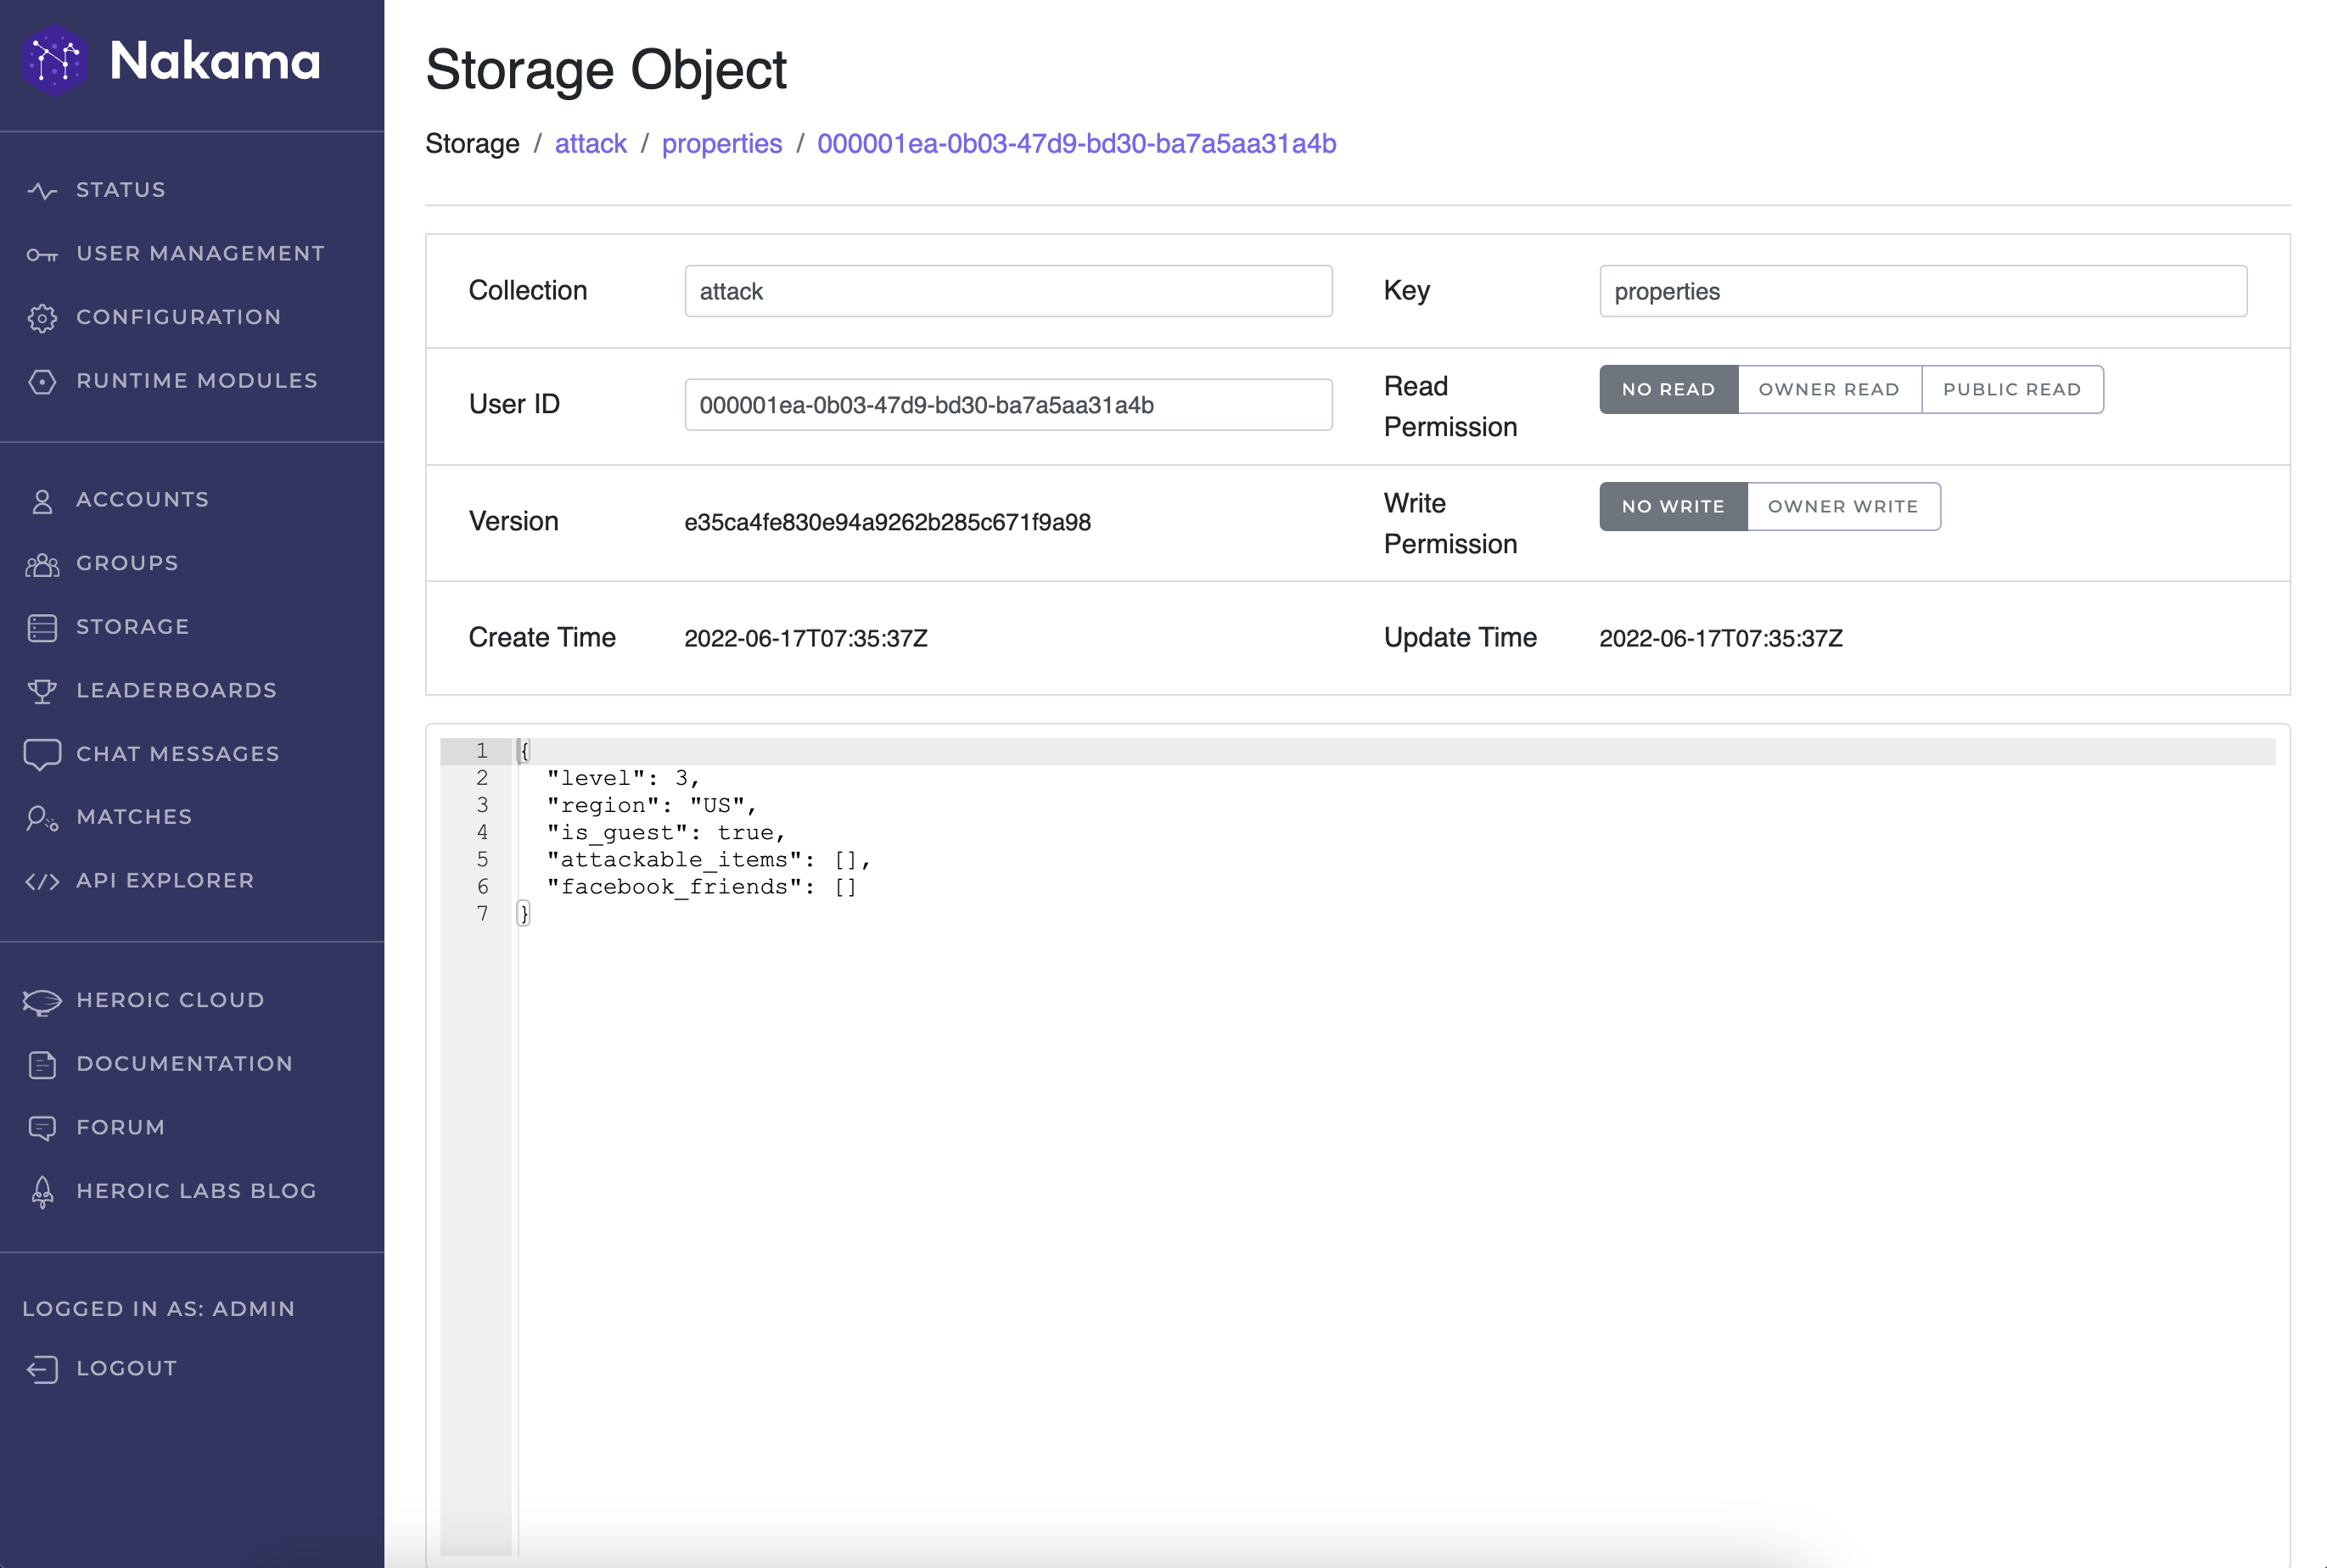 Console Storage Object Page